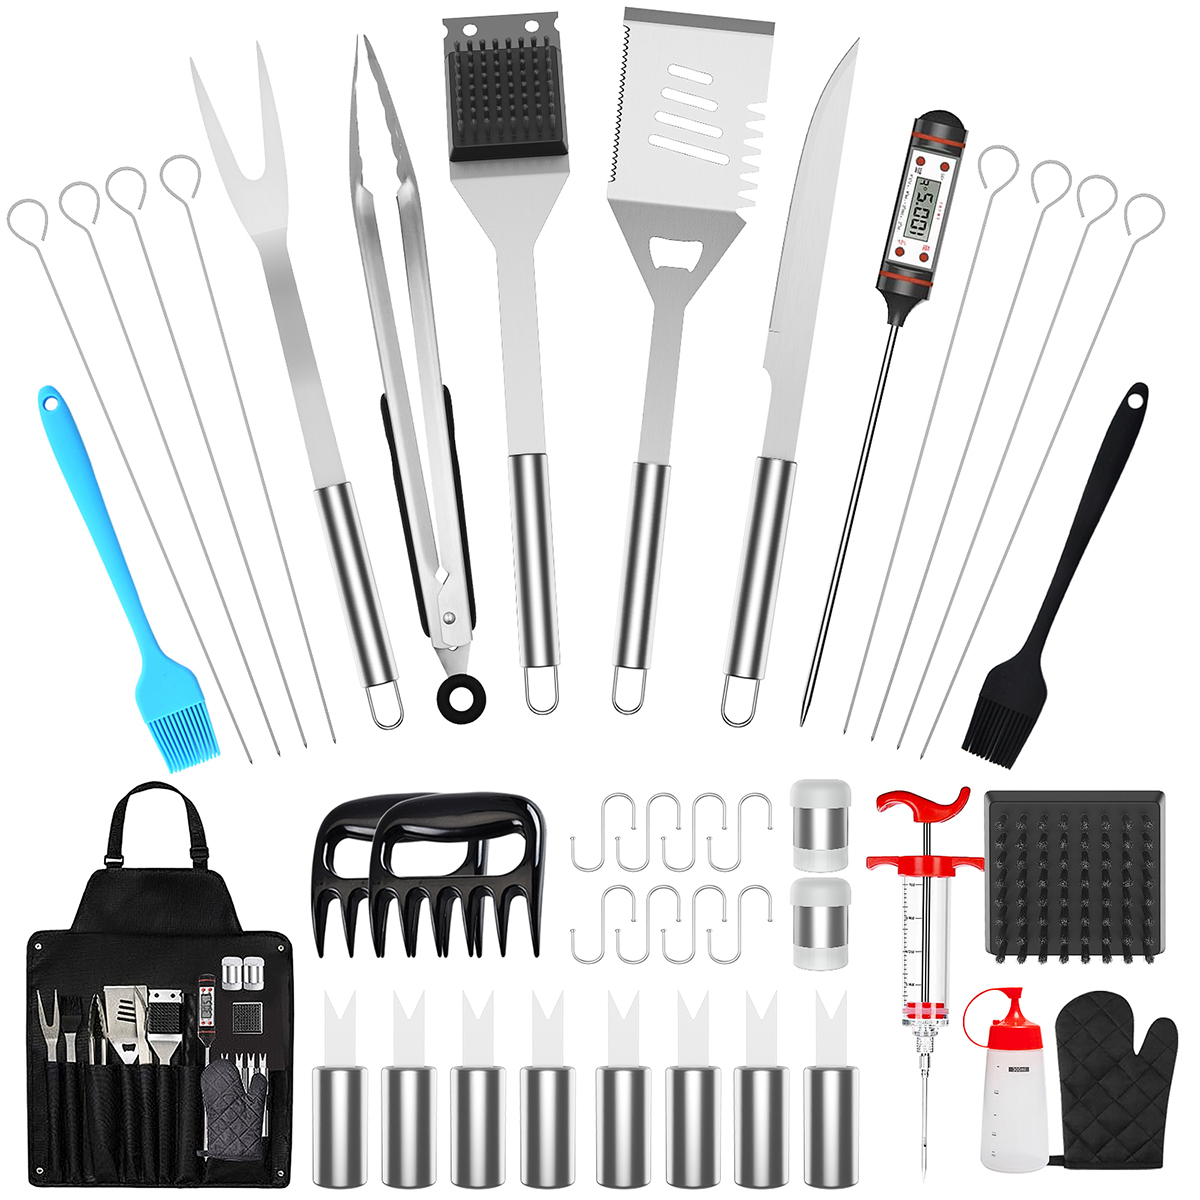 BBQ Grill Accessories,41PCS BBQ Tool Set, ExtraThick Stainless Steel Barbecue Utensils Cleaning Brush,Shovel Fork BBQ Accessories With Storage Bag for Camping Birthday Party on the Best bbq Set Gift - image 1 of 8